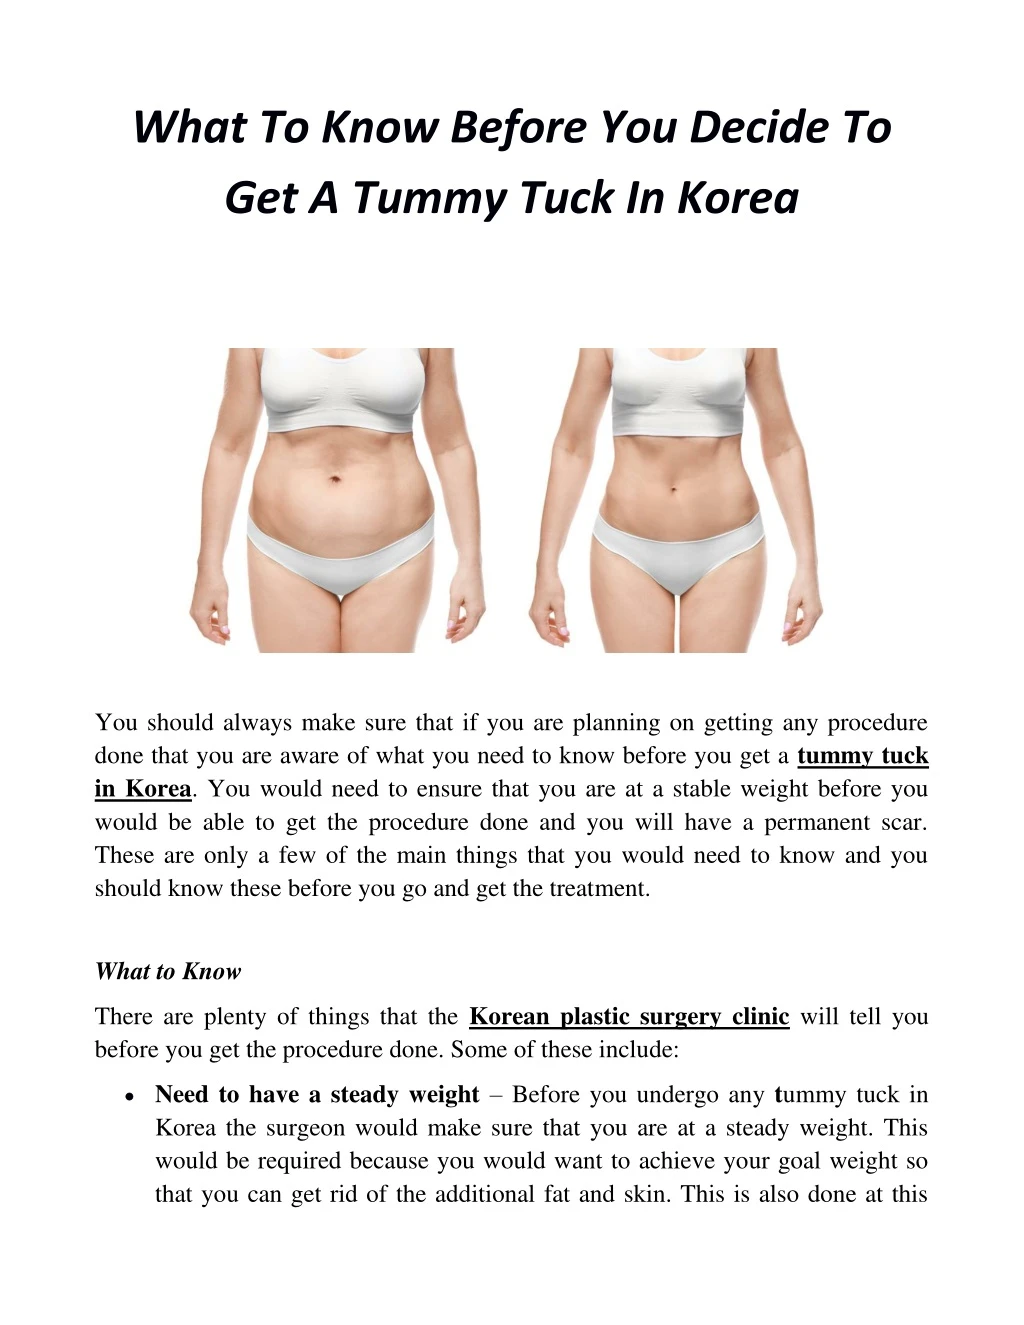 what to know before you decide to get a tummy